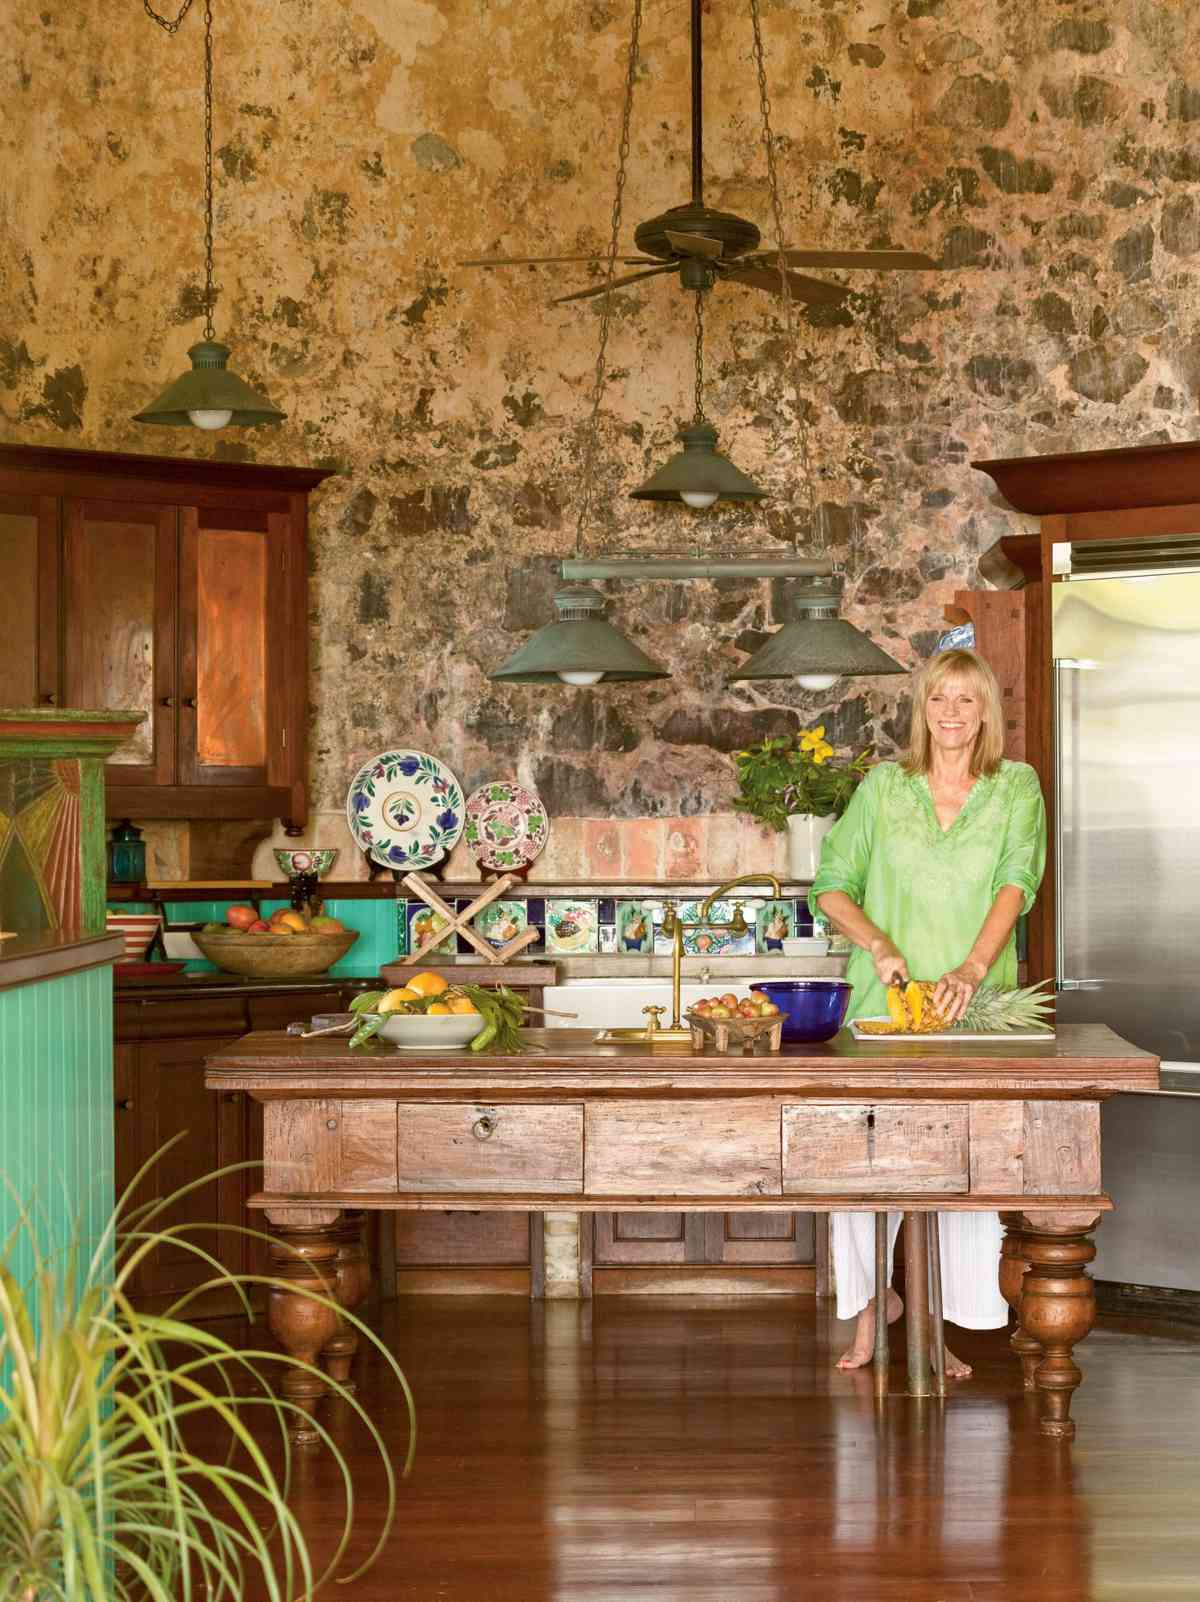 <p>This kitchen gets its distinctive look primarily from its location, at the base of a windmill tower on an old sugarcane plantation in the Caribbean. Recreate a similar island effect with natural wood pieces, lush vegetation, and bold floral accents in tropical shades of red, blue, and green.</p>
                            